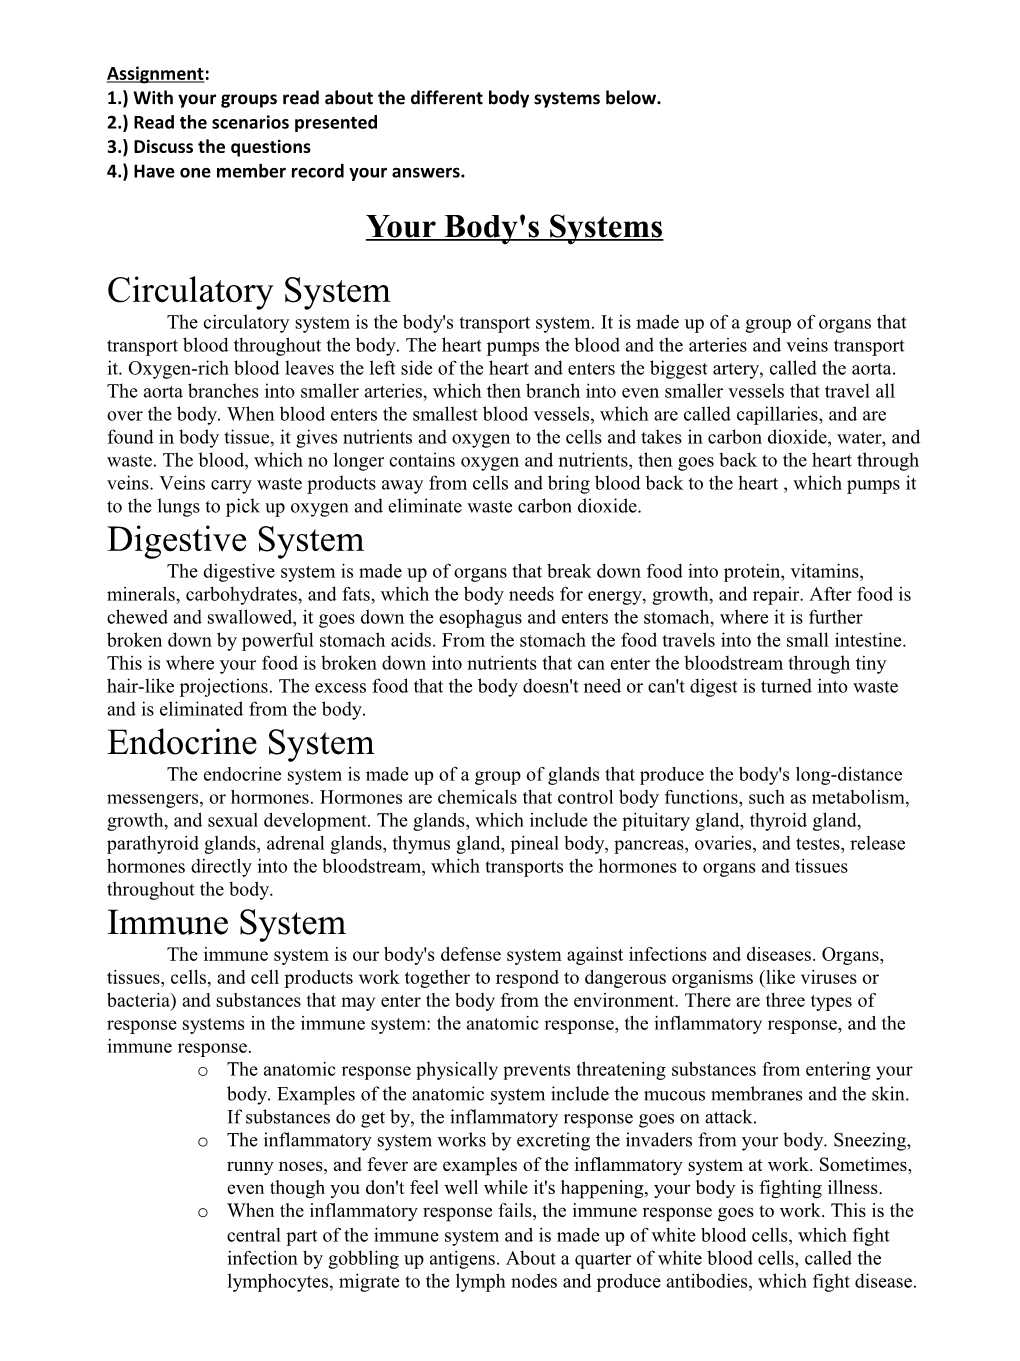 1.) with Your Groups Read About the Different Body Systems Below